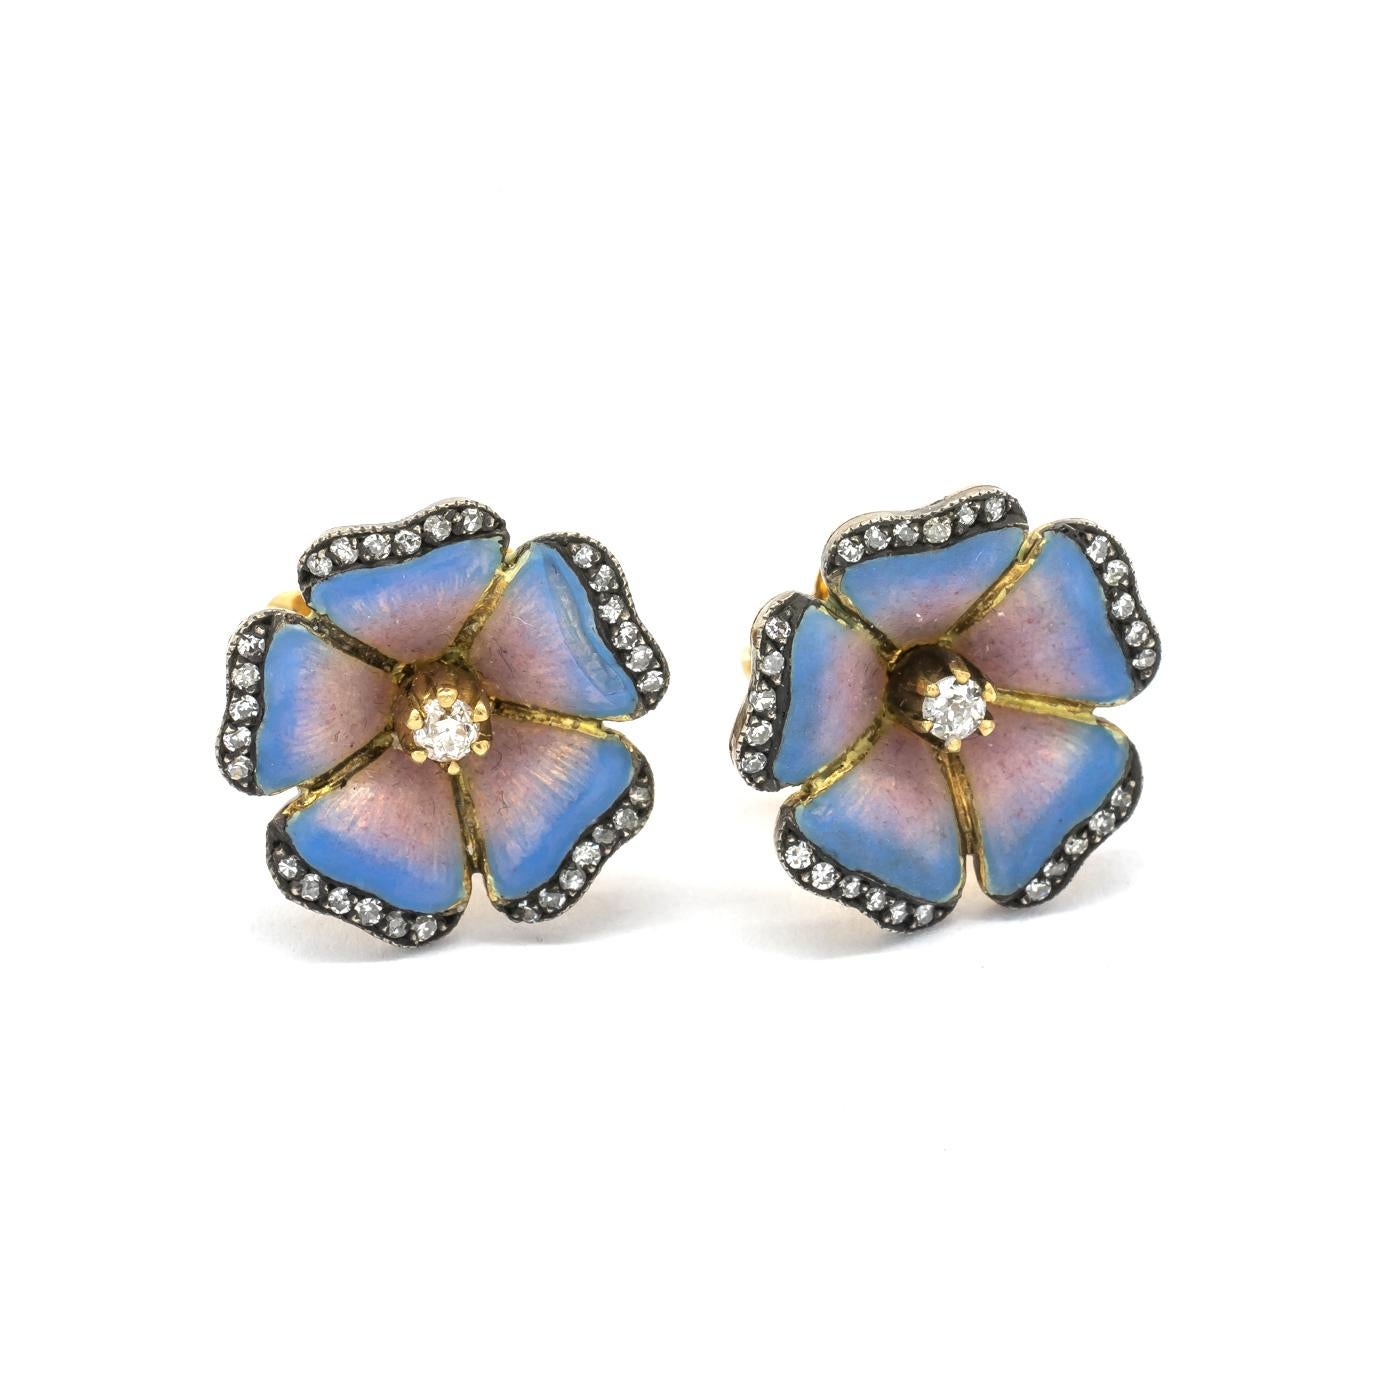 A pair of enamel flower earrings, with sky blue to pink basse taille enamel petals, with an old-cut diamond in the centre and eight-cut diamonds set in the petal edges, mounted in gold with silver settings.